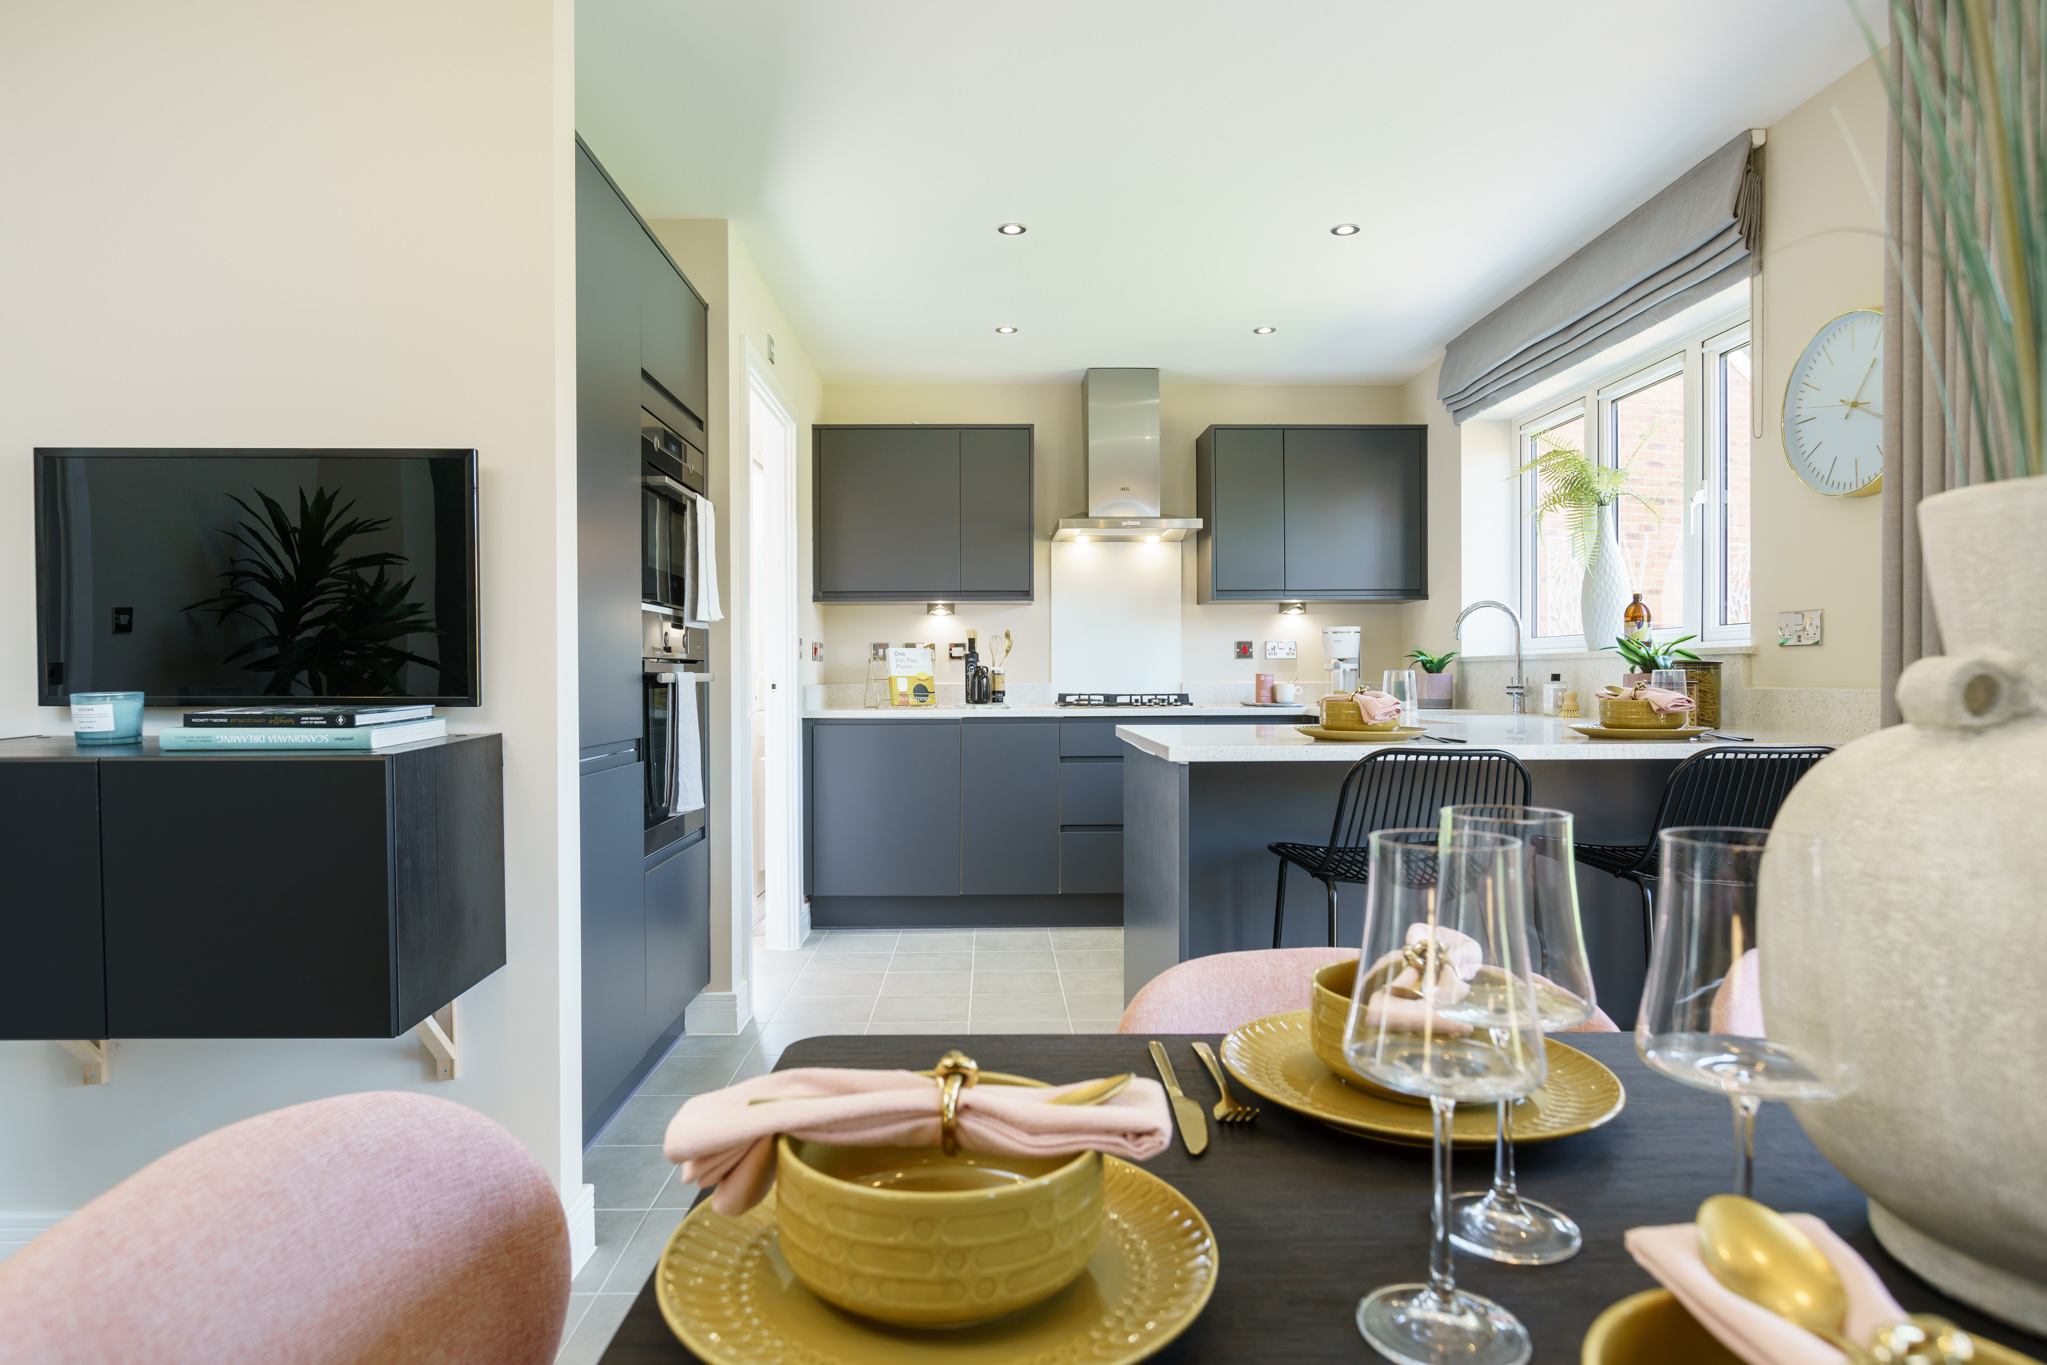 Property 2 of 11. Showhome Photography